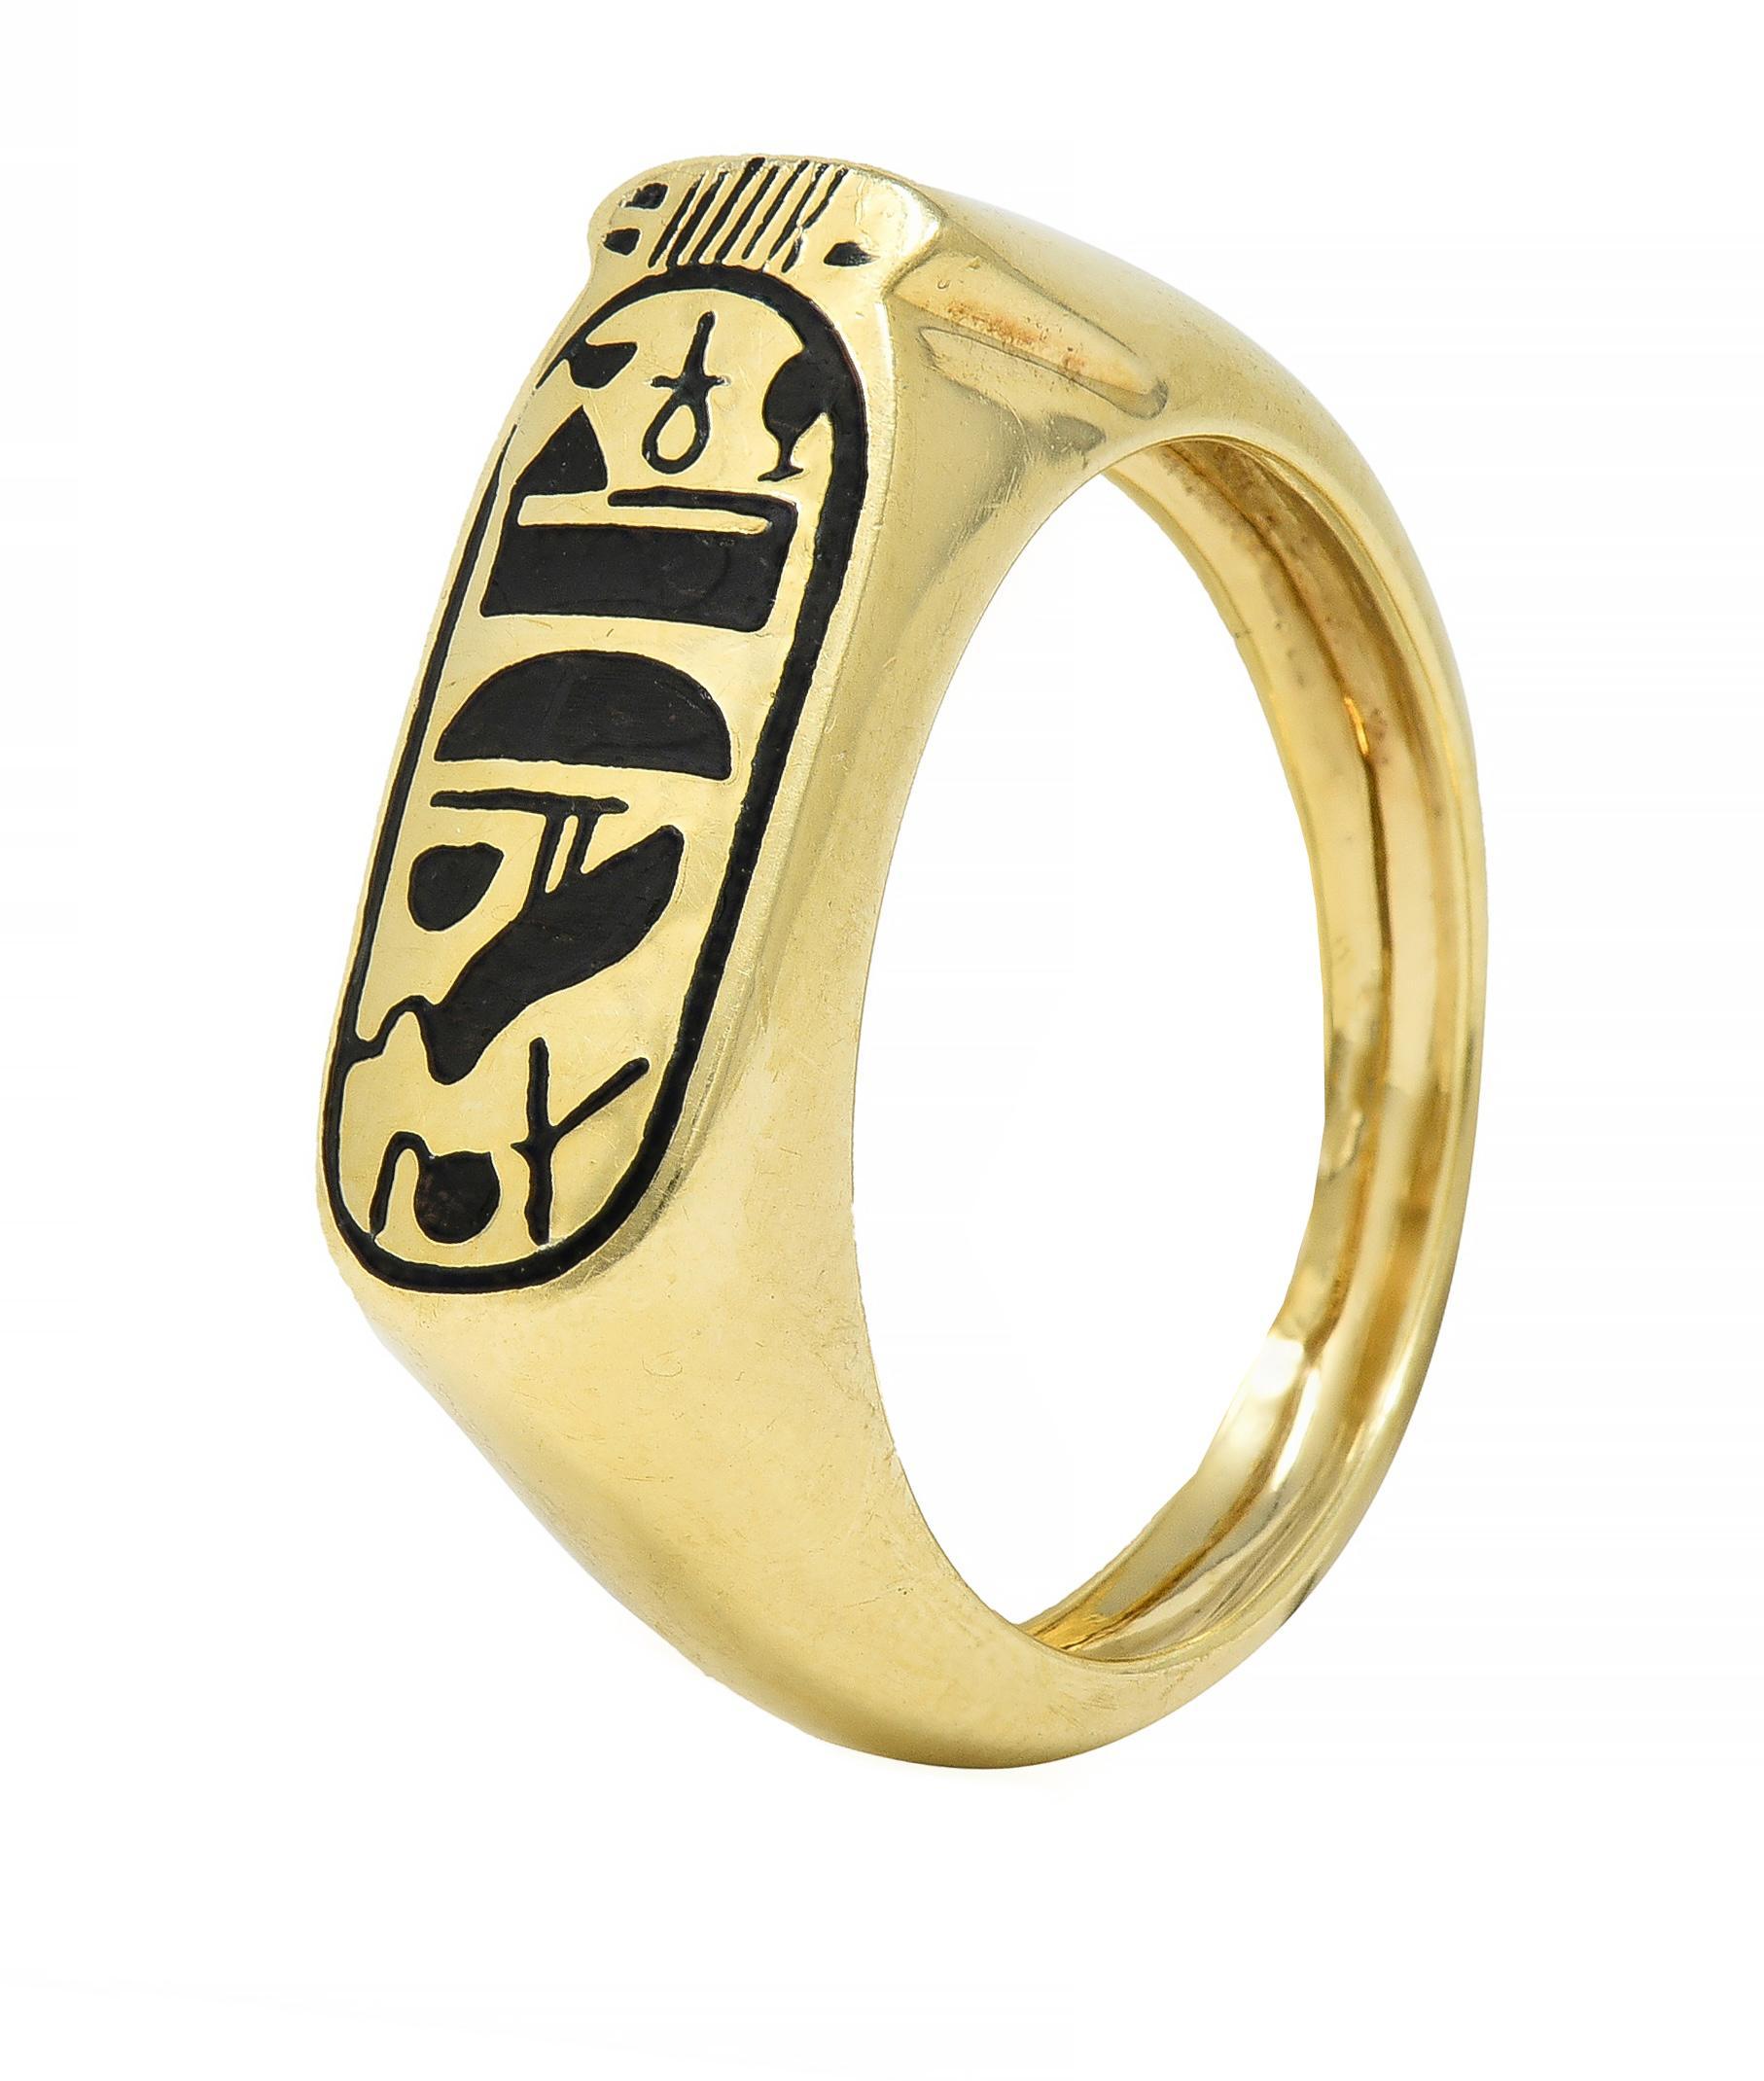 Designed as a slim cartouche shape featuring champlevé enamel hieroglyphics
Depicting a bird, anch, bowl, and other forms with linear surround 
Completed by rounded shoulders 
With high polish finish
Stamped for 14 karat gold
With maker's mark